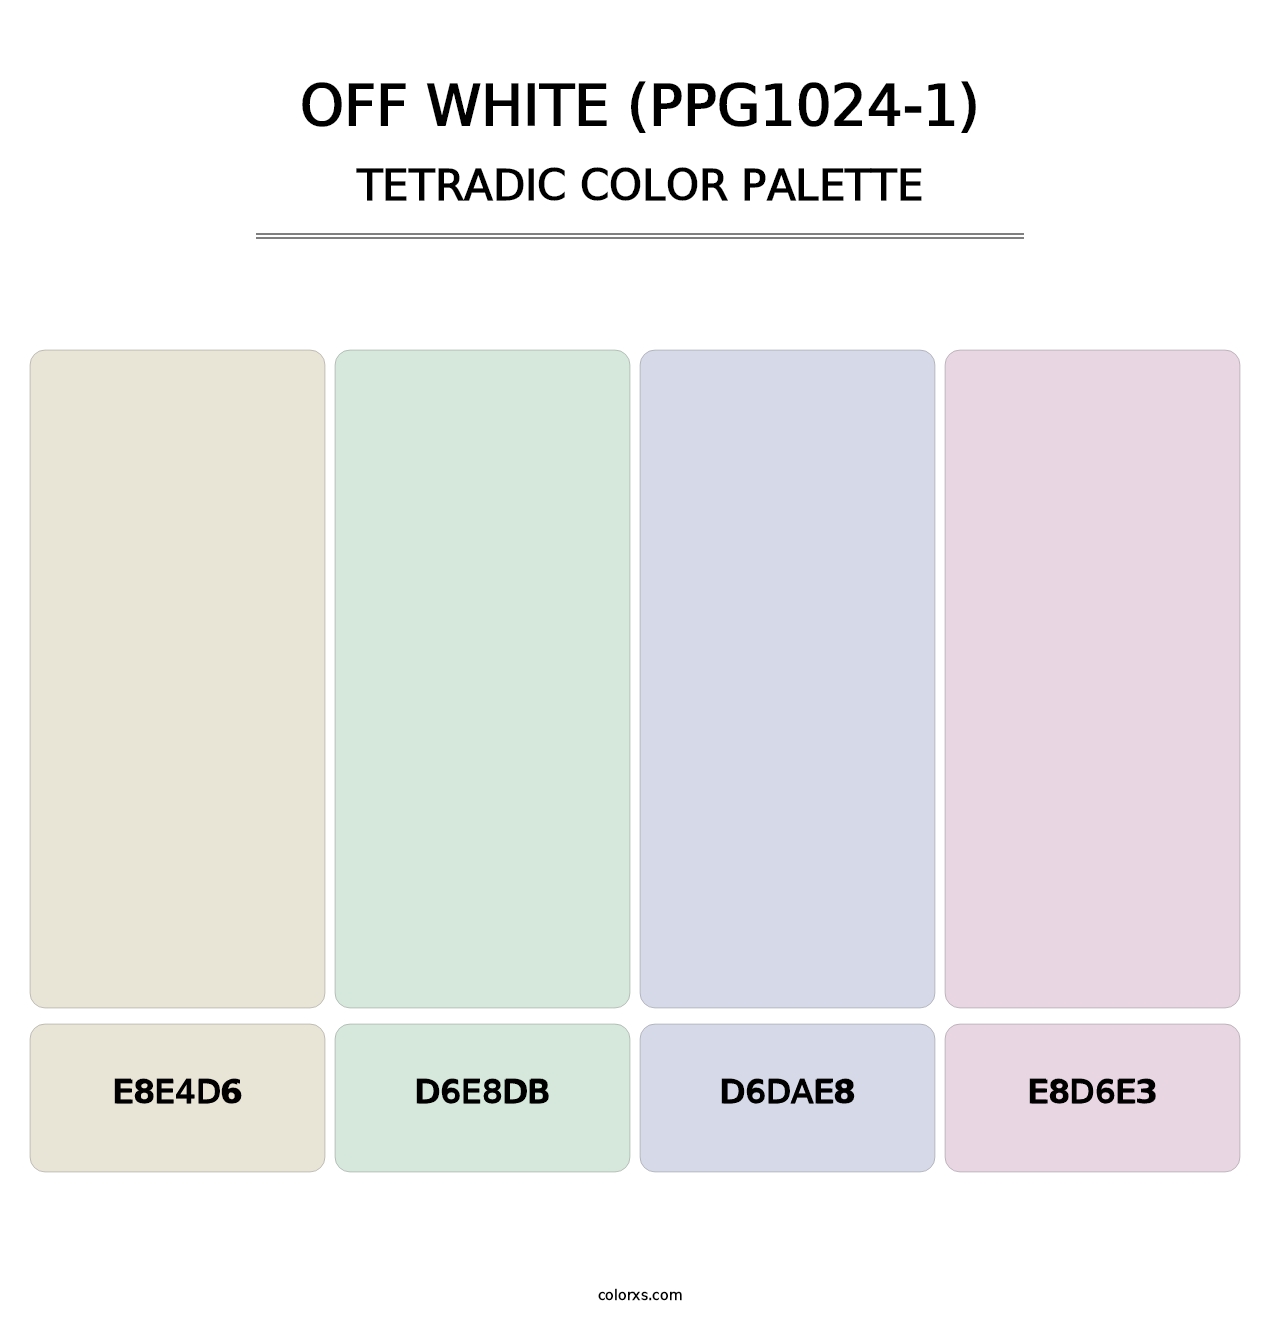 Off White (PPG1024-1) - Tetradic Color Palette